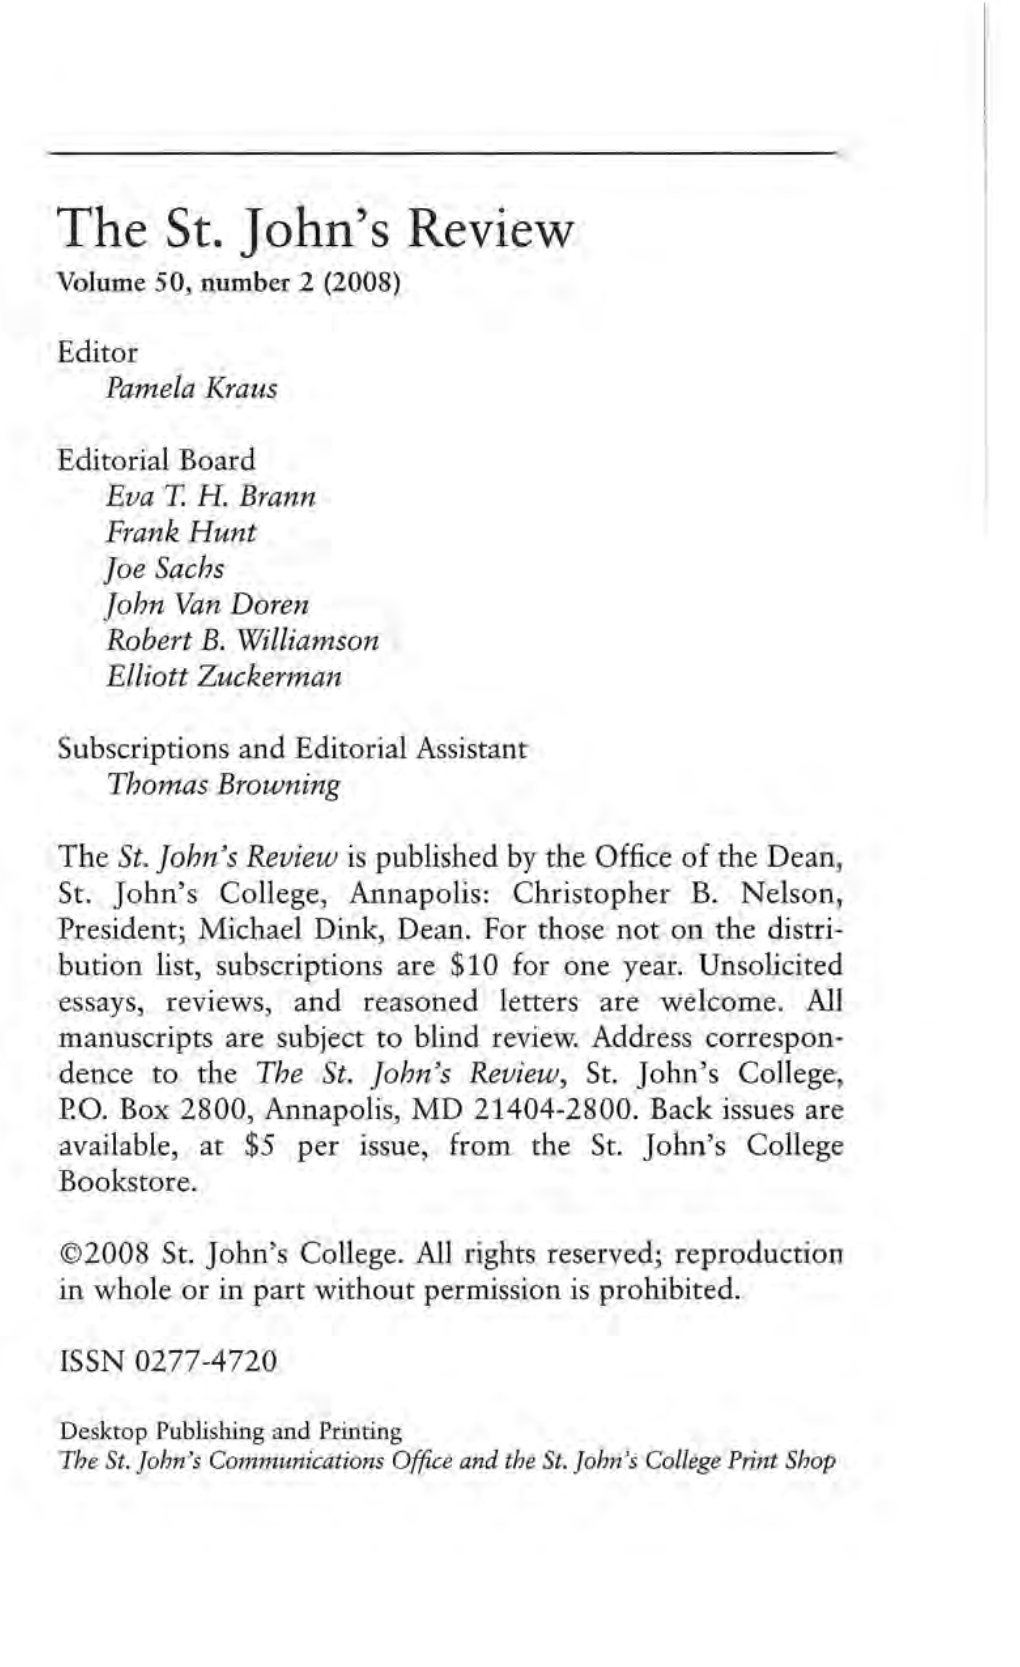 The St. John's Review Volume 50, Number 2 (2008)